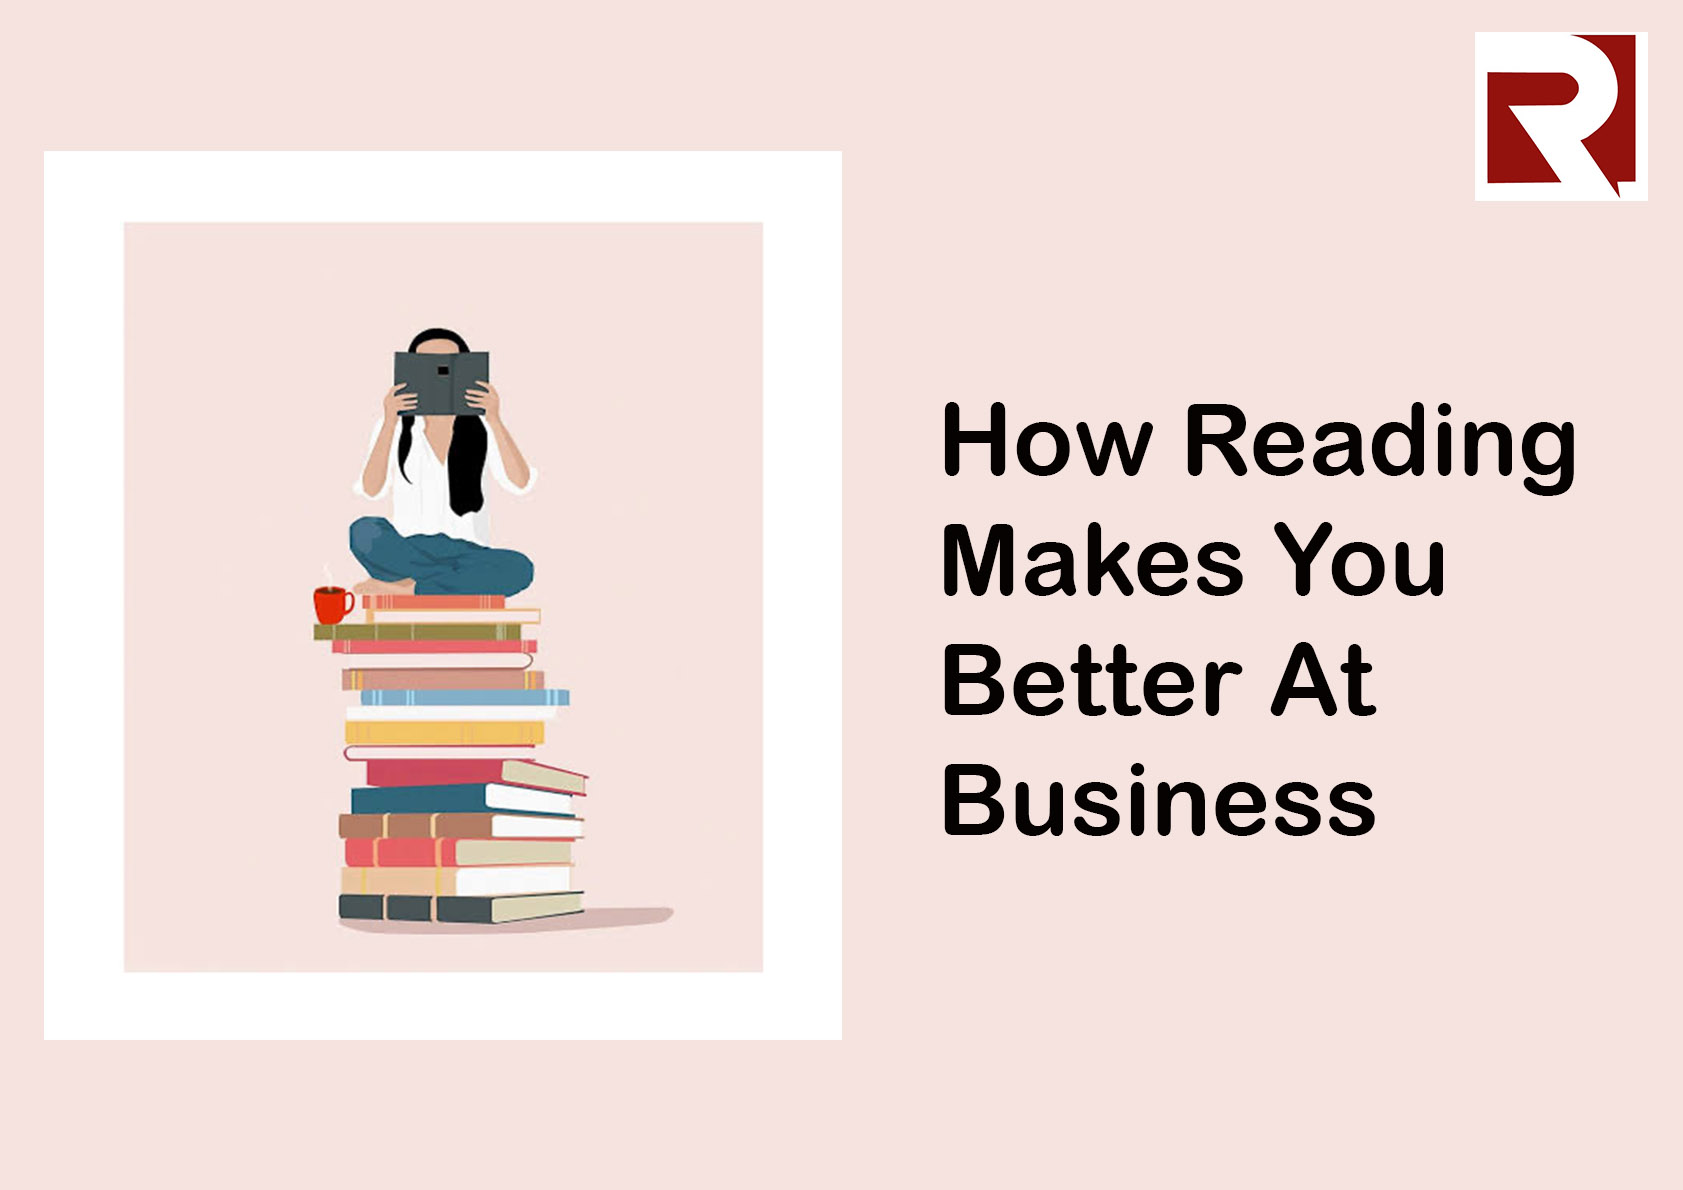 How Reading Makes You Better At Business